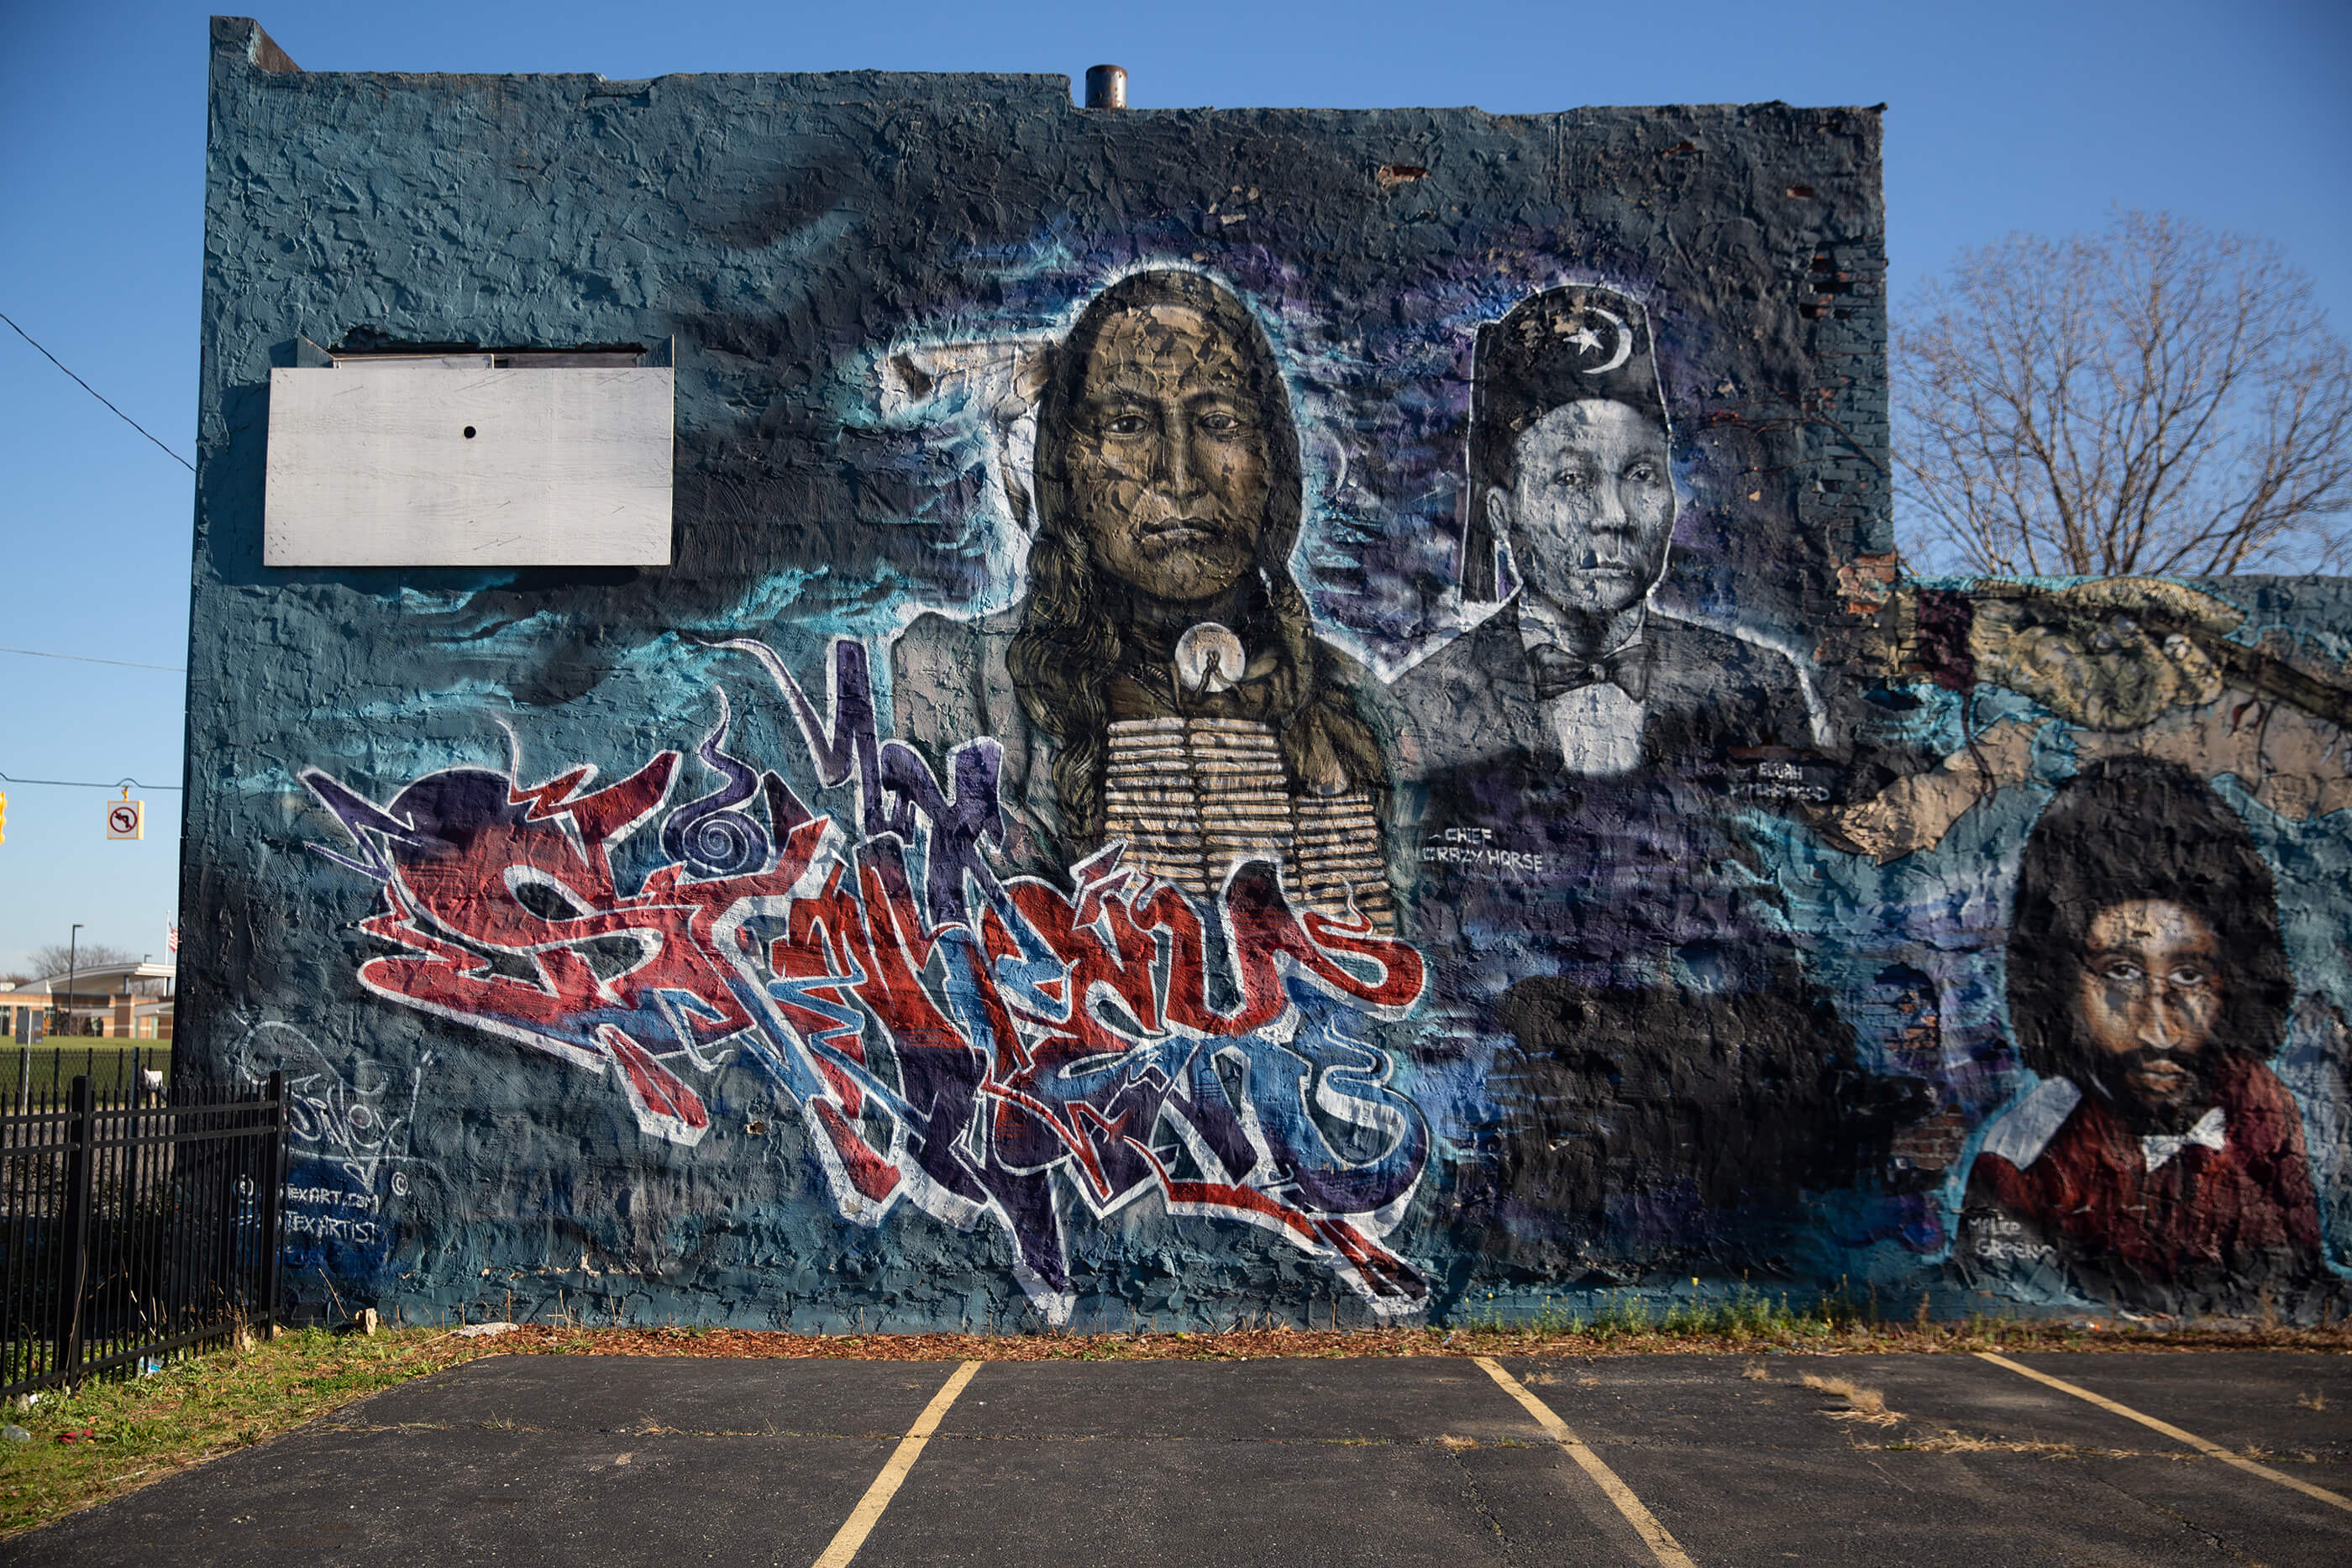 A mural of native americans on the side of a building